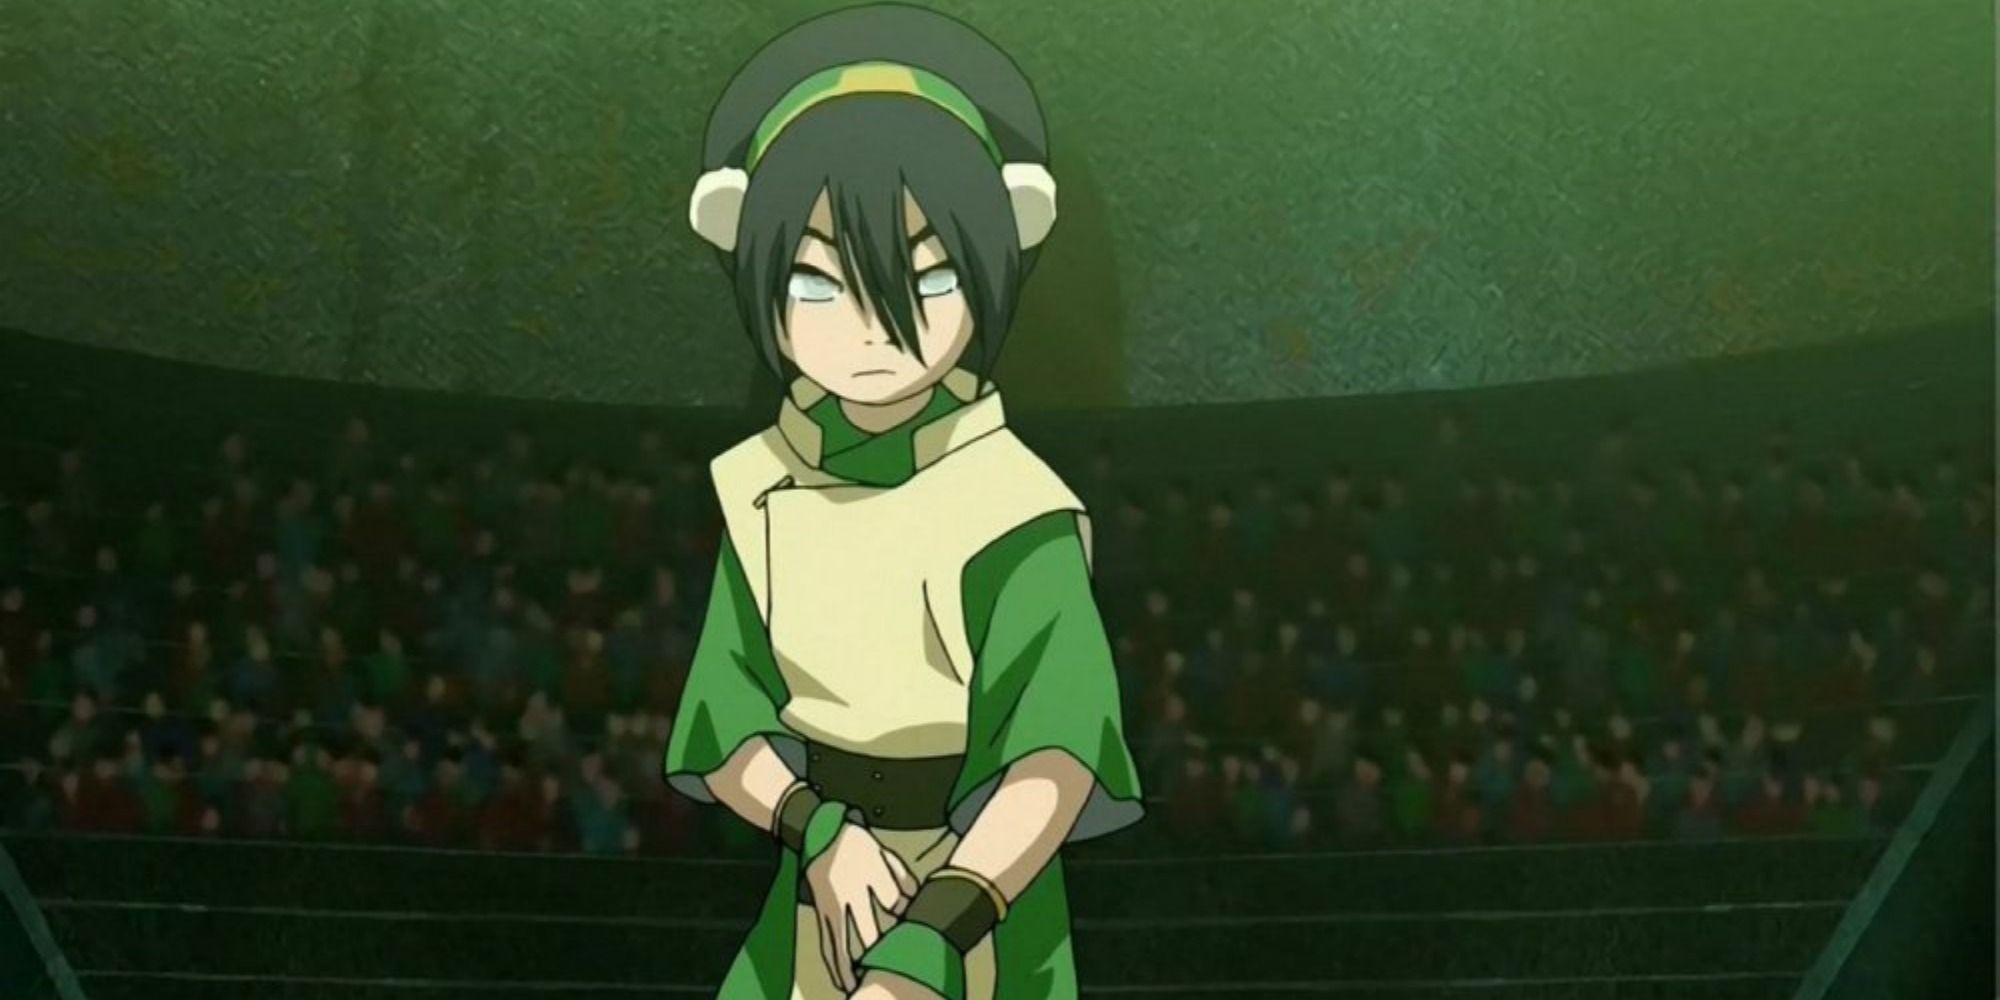 A profile screenshot of Toph in a ready stance from Avatar: The Last Airbender